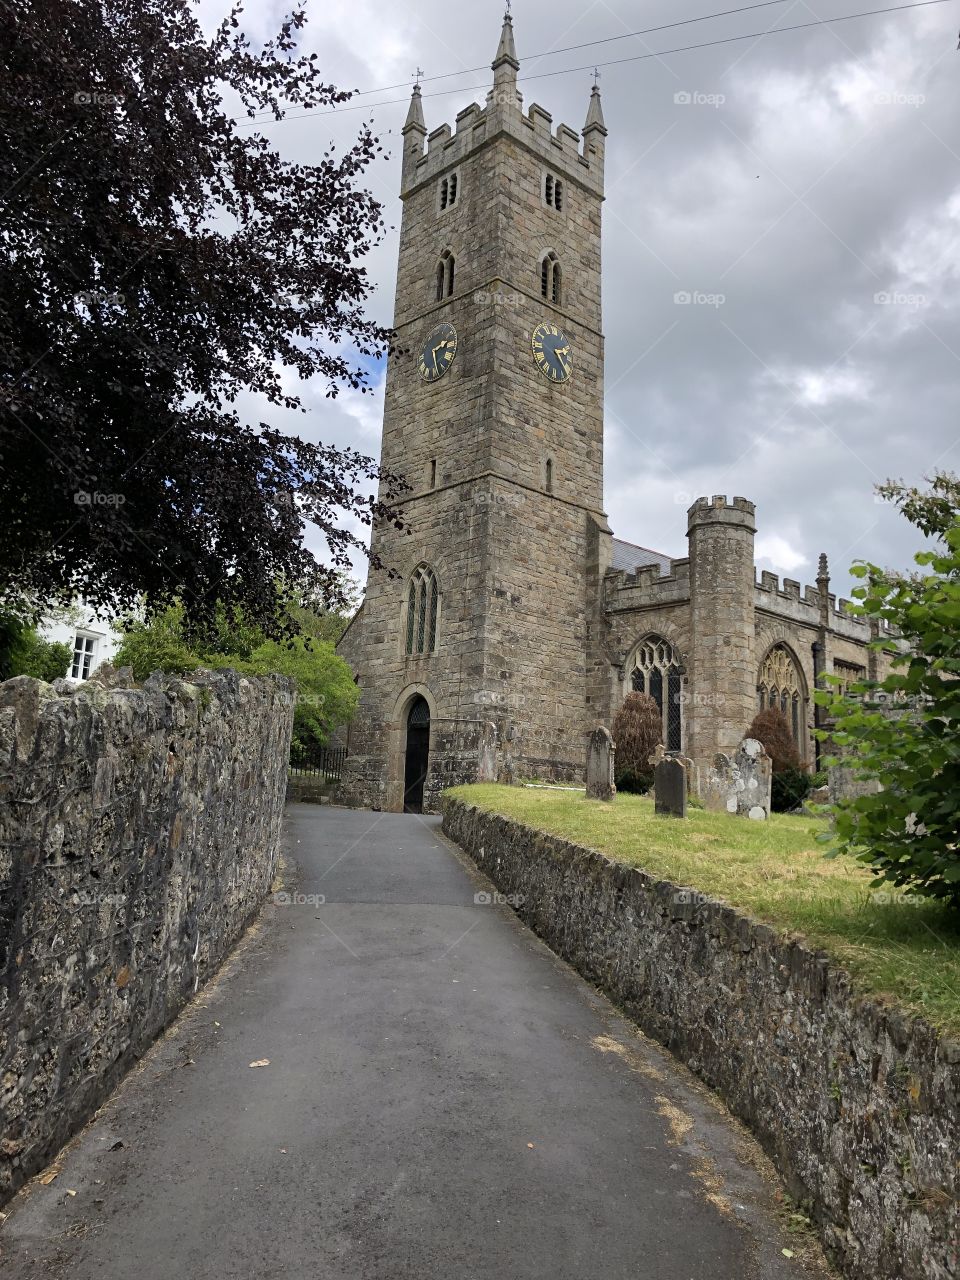 A portrayal of this rather striking church of Bovey Tracey in Devon, UK